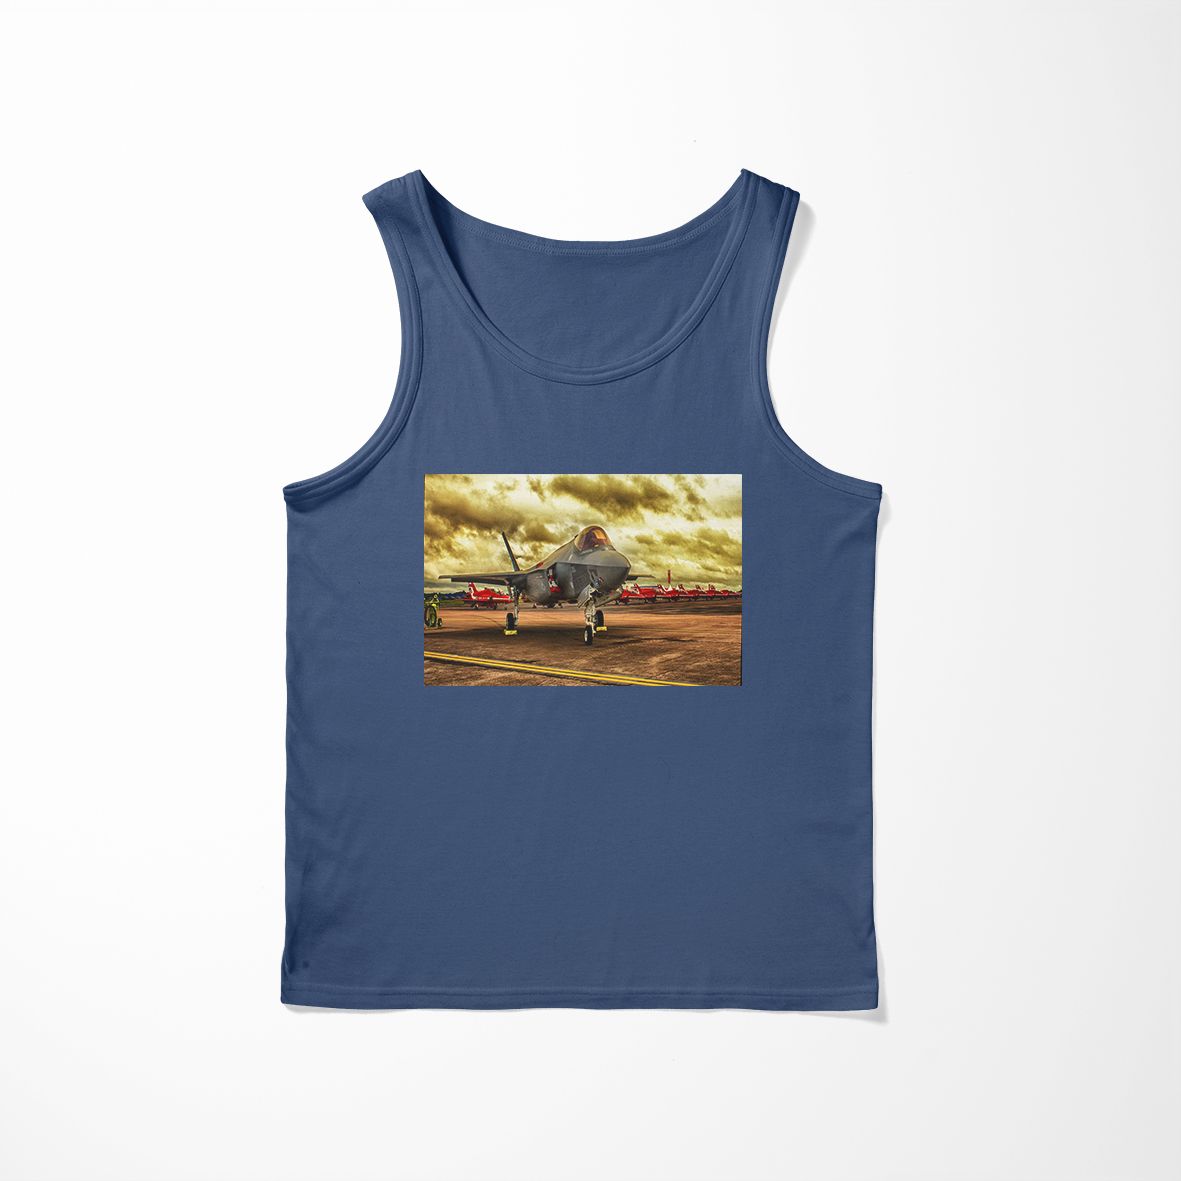 Fighting Falcon F35 at Airbase Designed Tank Tops